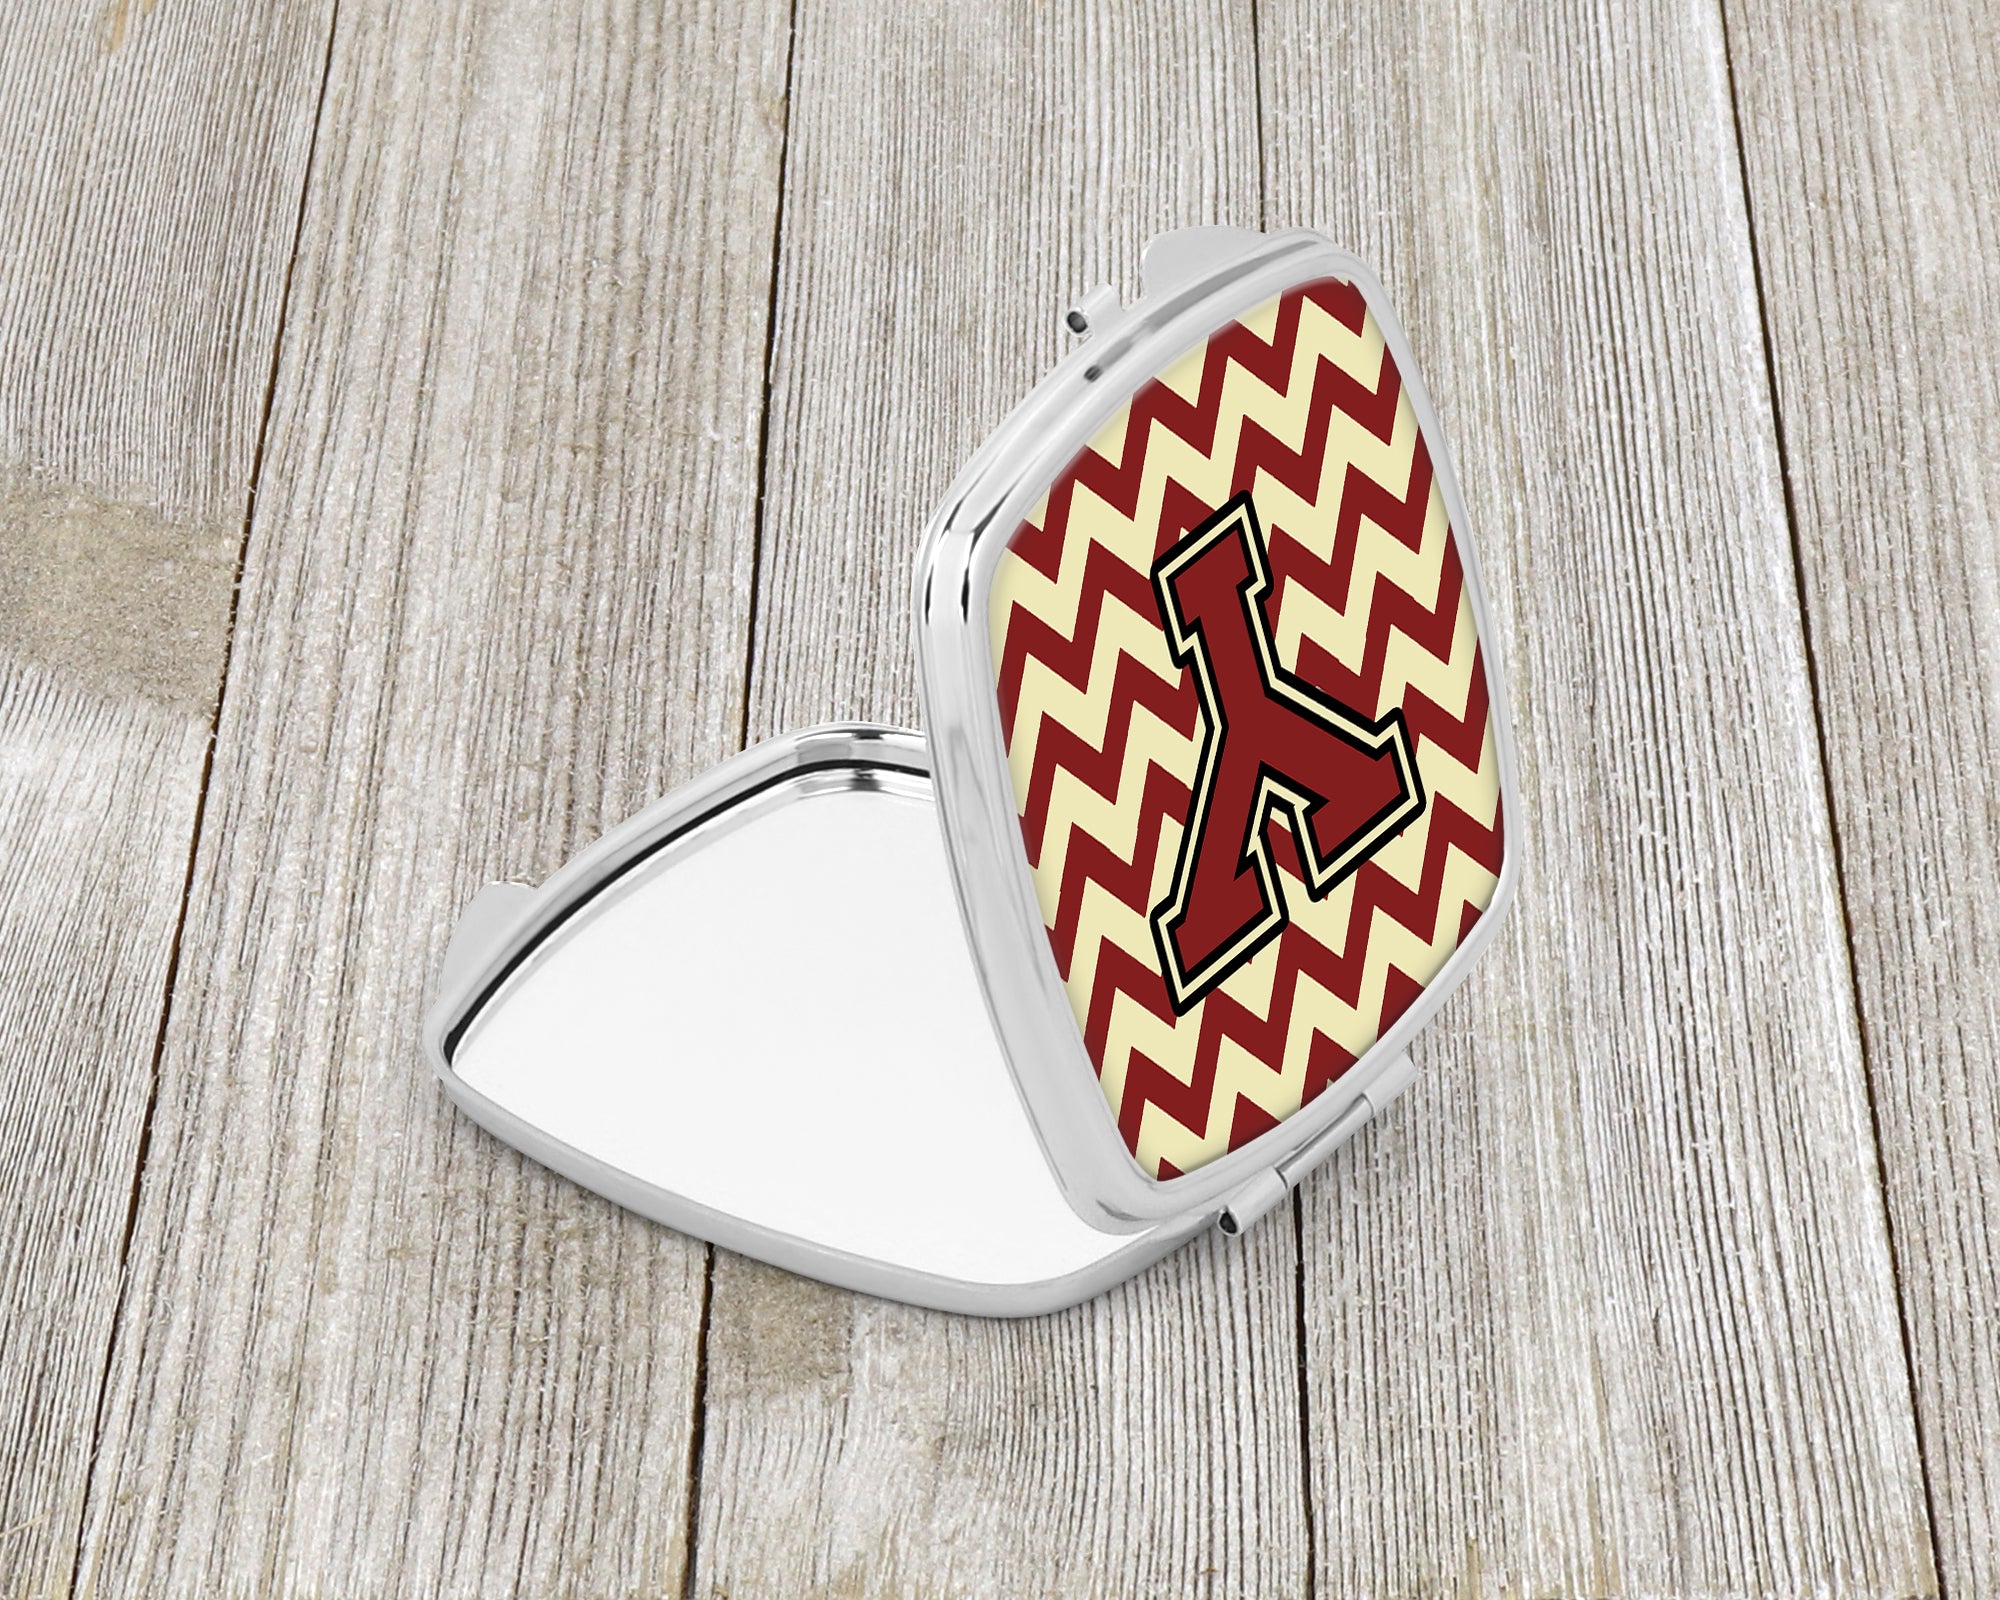 Letter Y Chevron Maroon and Gold Compact Mirror CJ1061-YSCM  the-store.com.